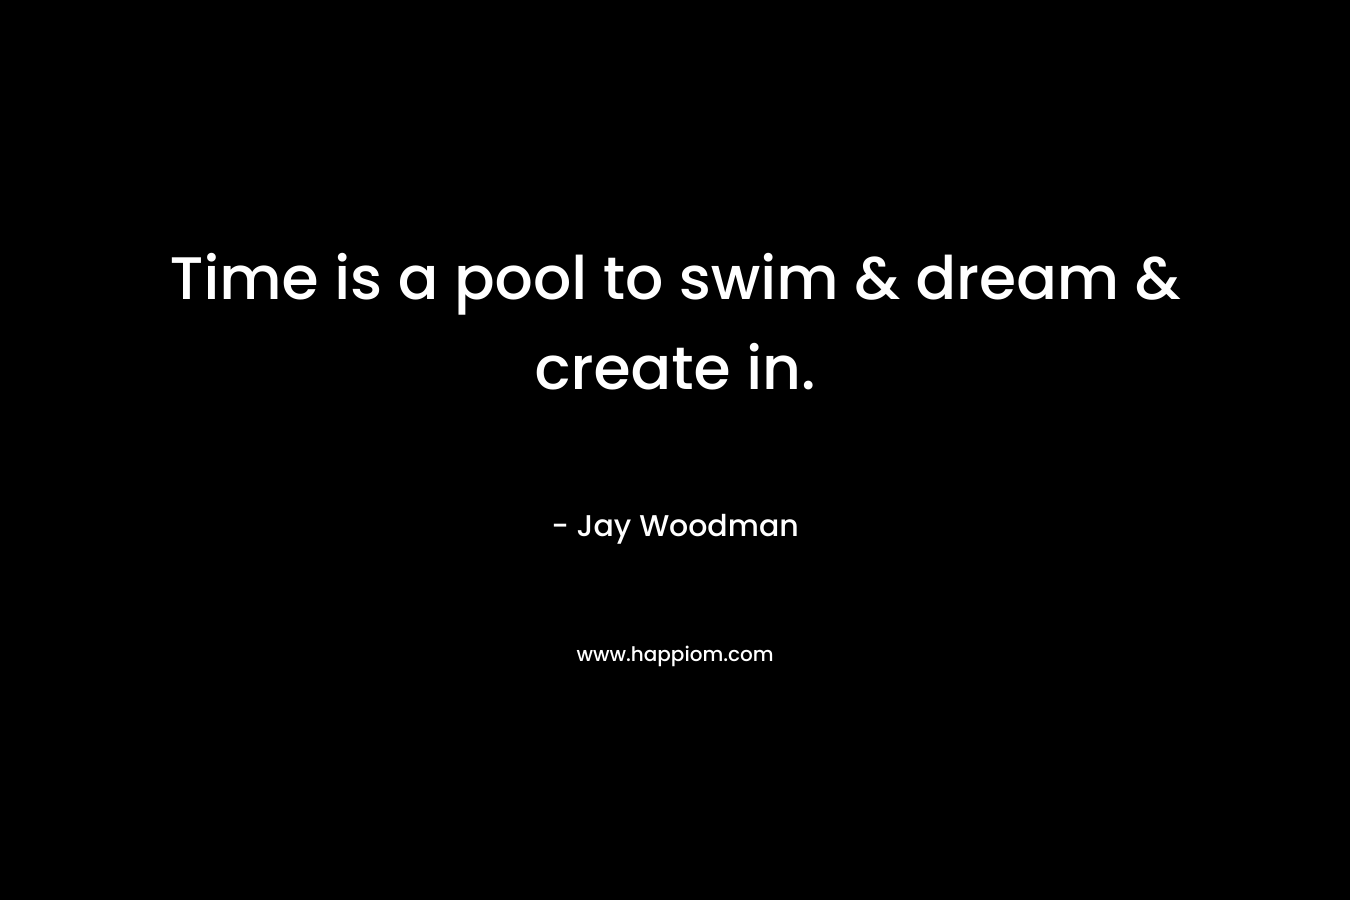 Time is a pool to swim & dream & create in.